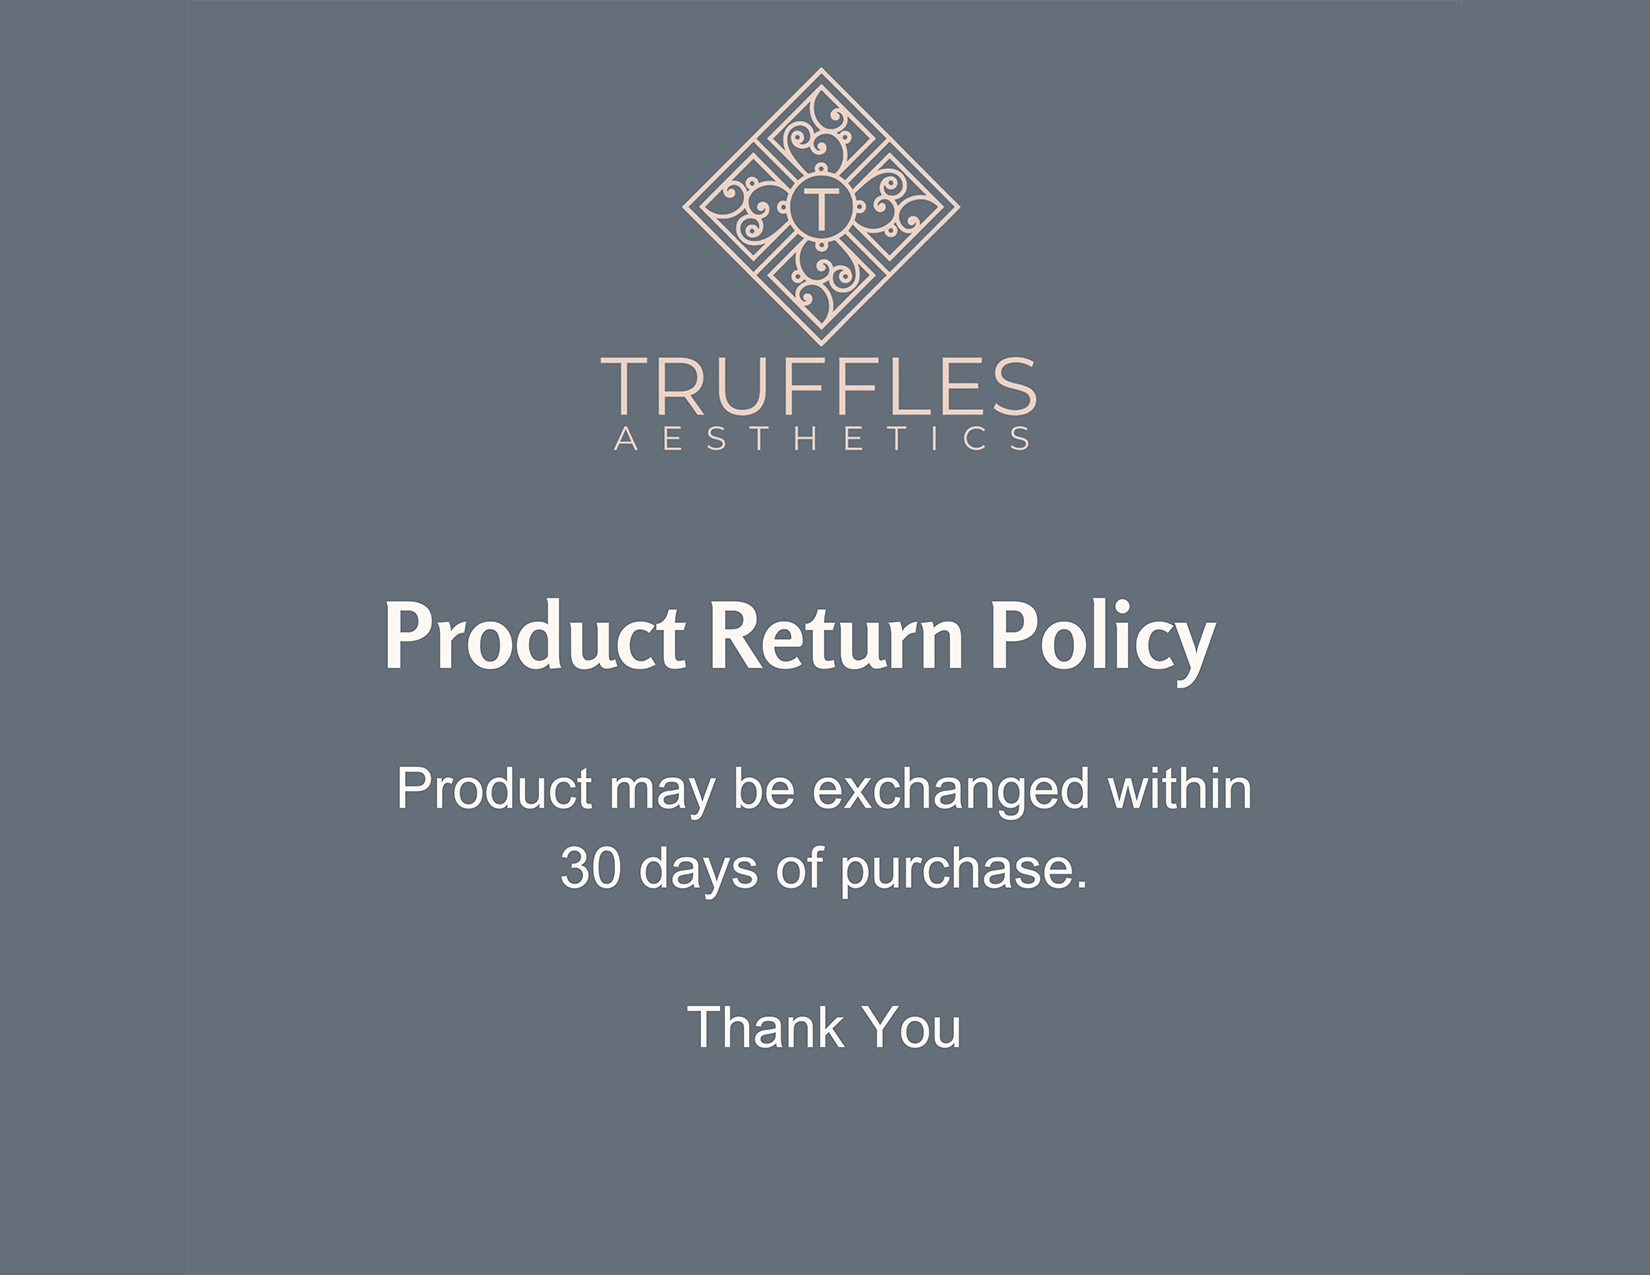 return policy products may be returned for exchange within 30 days of purchase